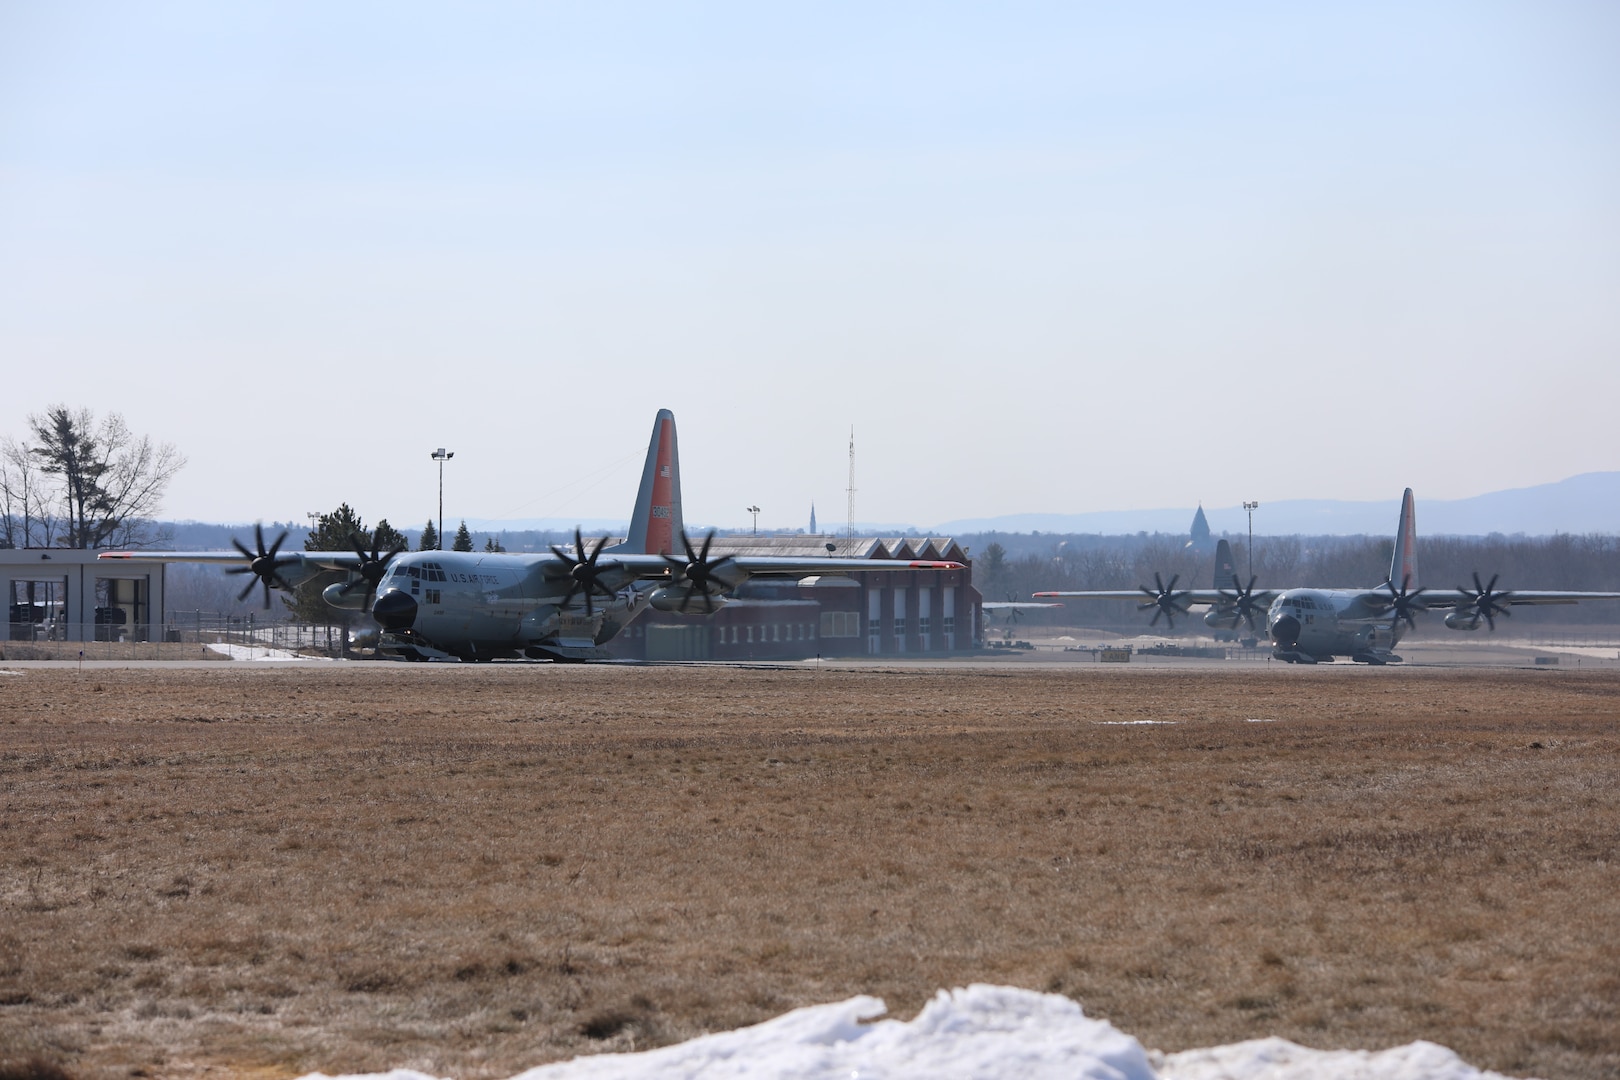 LC-130 Skibirds from the New York Air National Guard's 109th Airlift Wing take off to fly to Greenland March 10, 2021. The 109th goes to Greenland every year for training and to support the National Science Foundation.